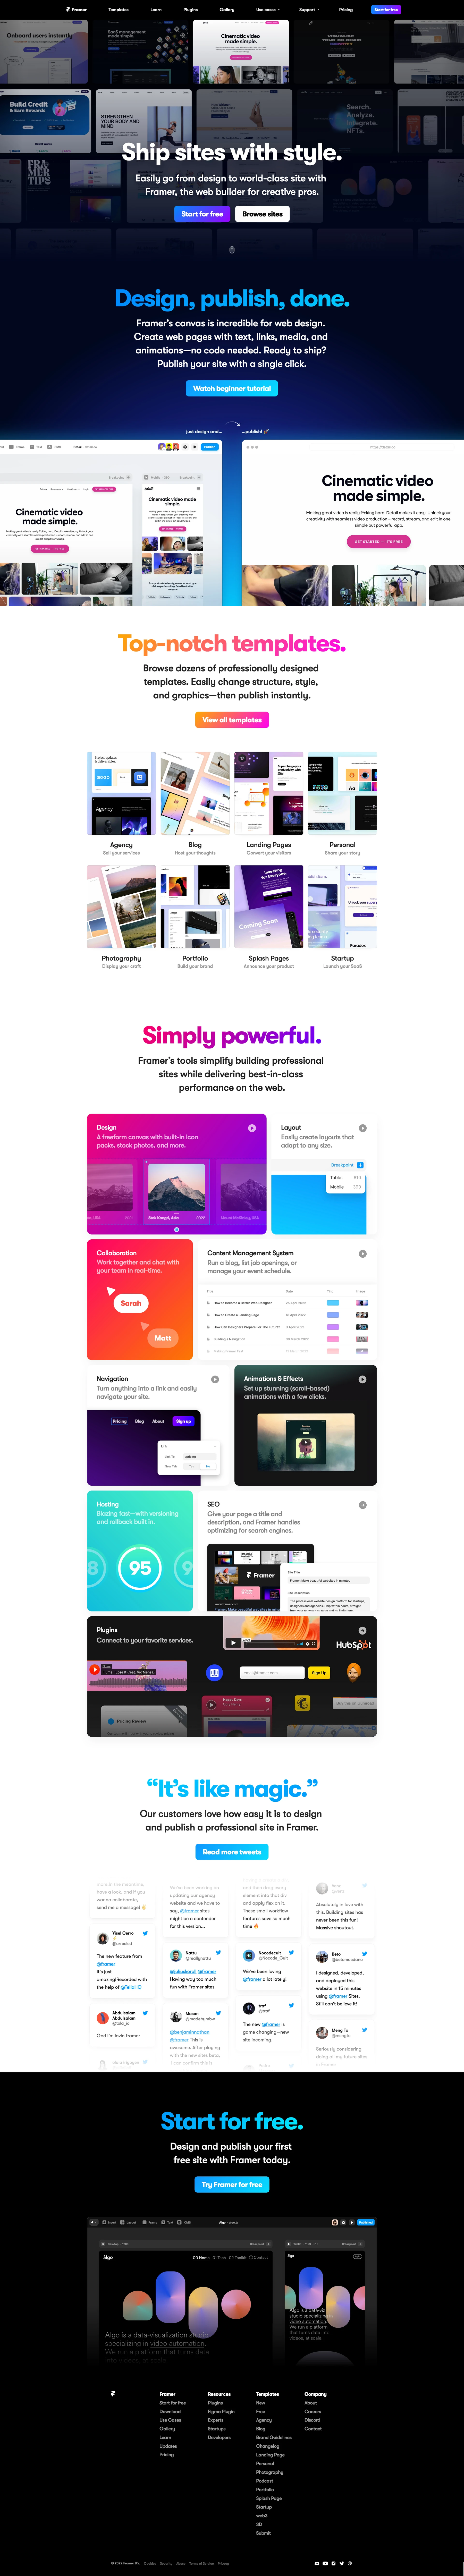 Framer Landing Page Example: Easily go from design to world-class site with Framer, the web builder for creative pros.